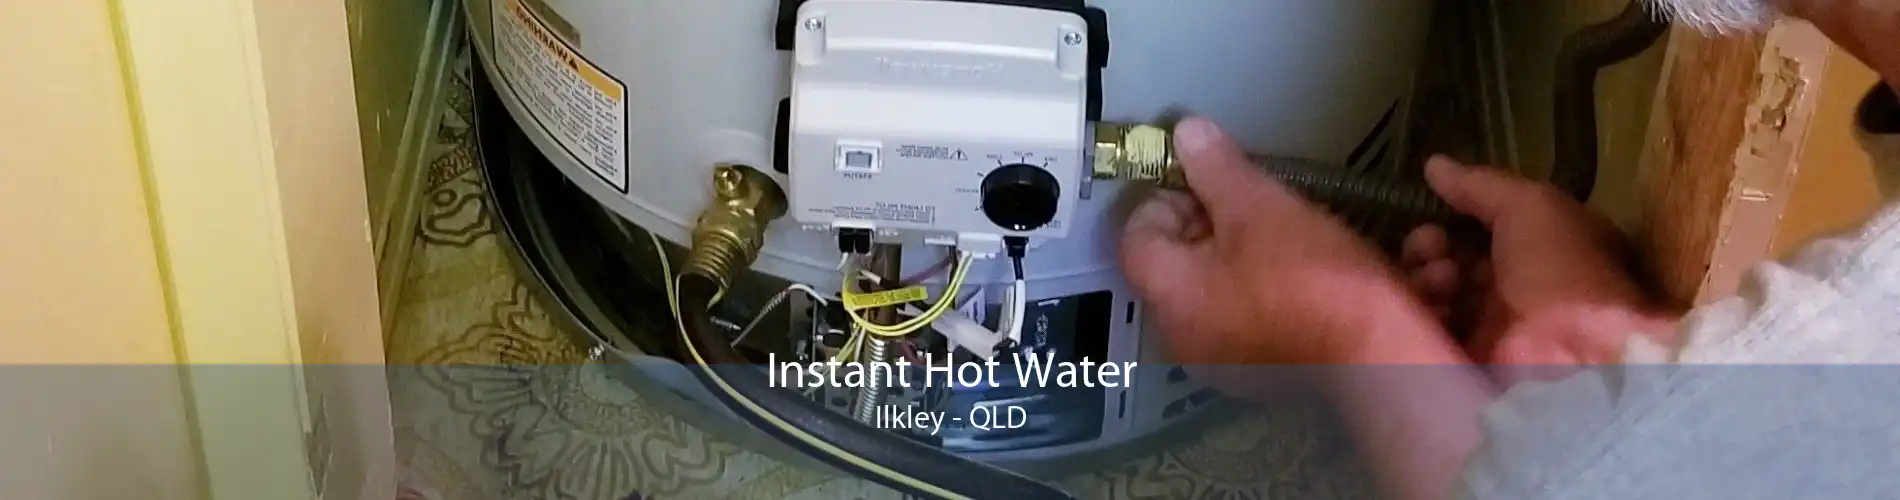 Instant Hot Water Ilkley - QLD